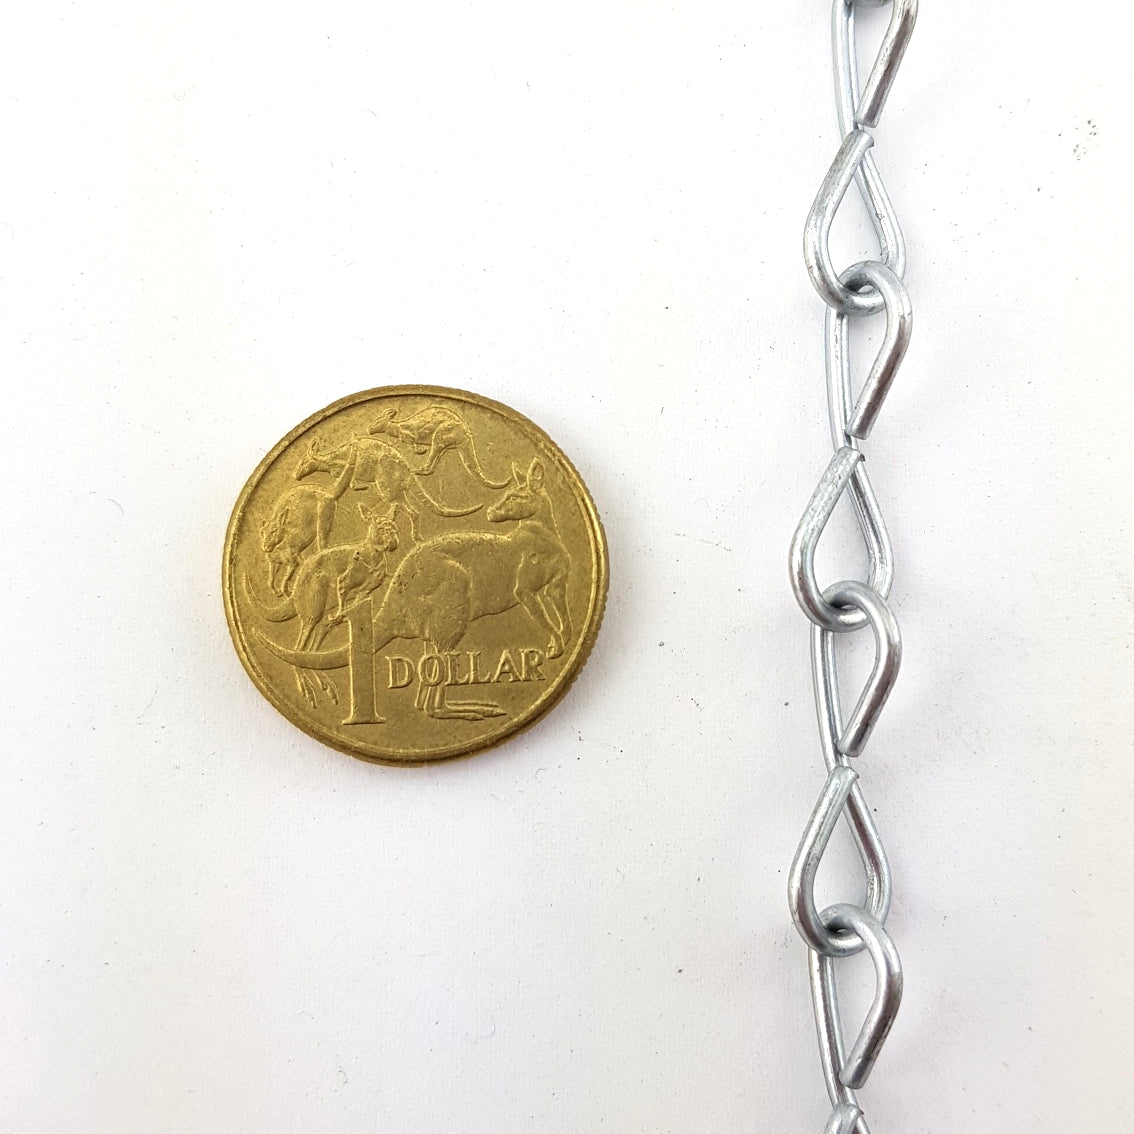 Australian made Single Jack Chain in galvanised finish, size 1.6mm. Chain by the metre.